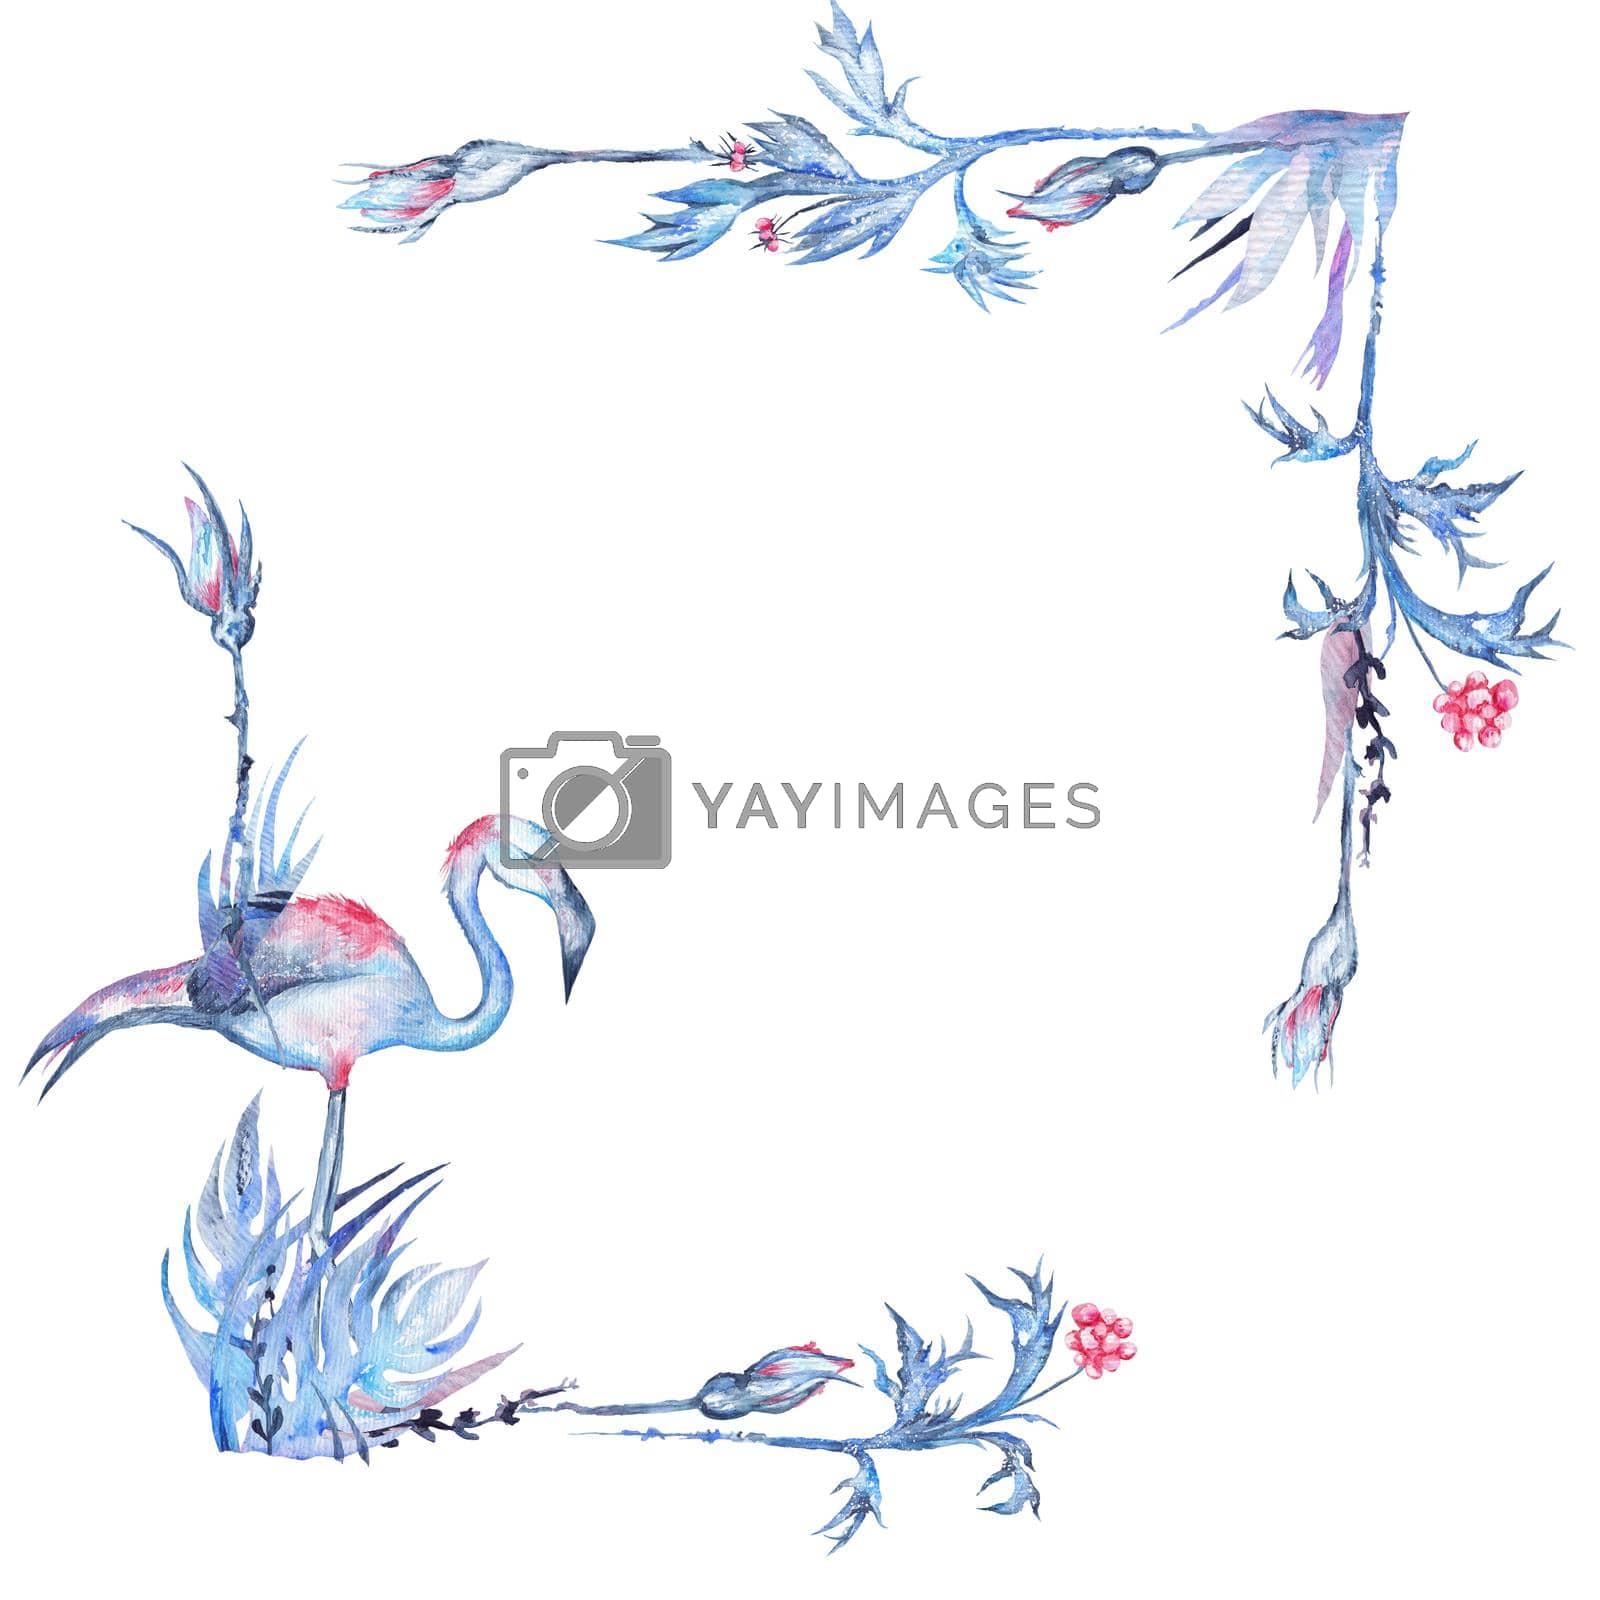 Royalty free image of Watercolor Tropical Frame by kisika